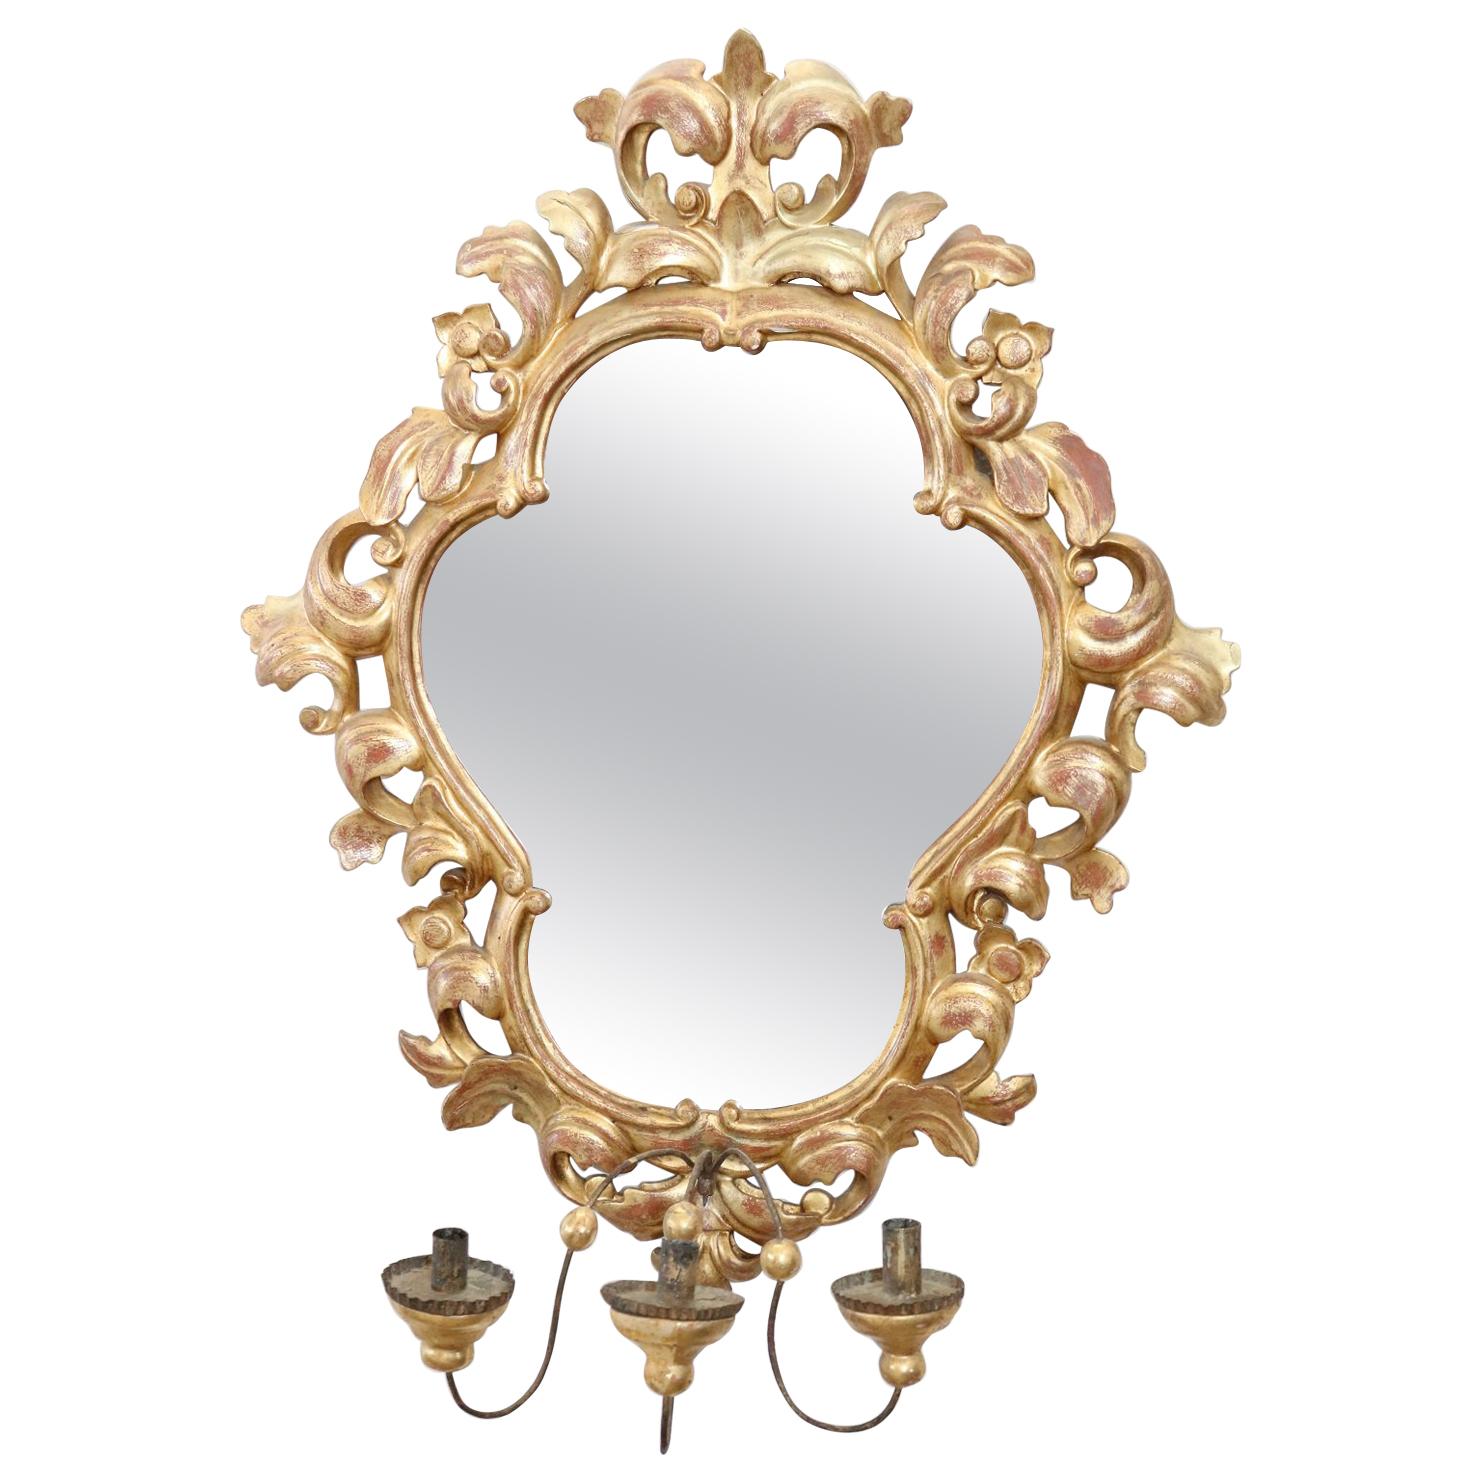 20th Century Italian Baroque Style Gilded Carved Wood Wall Mirror with Candle